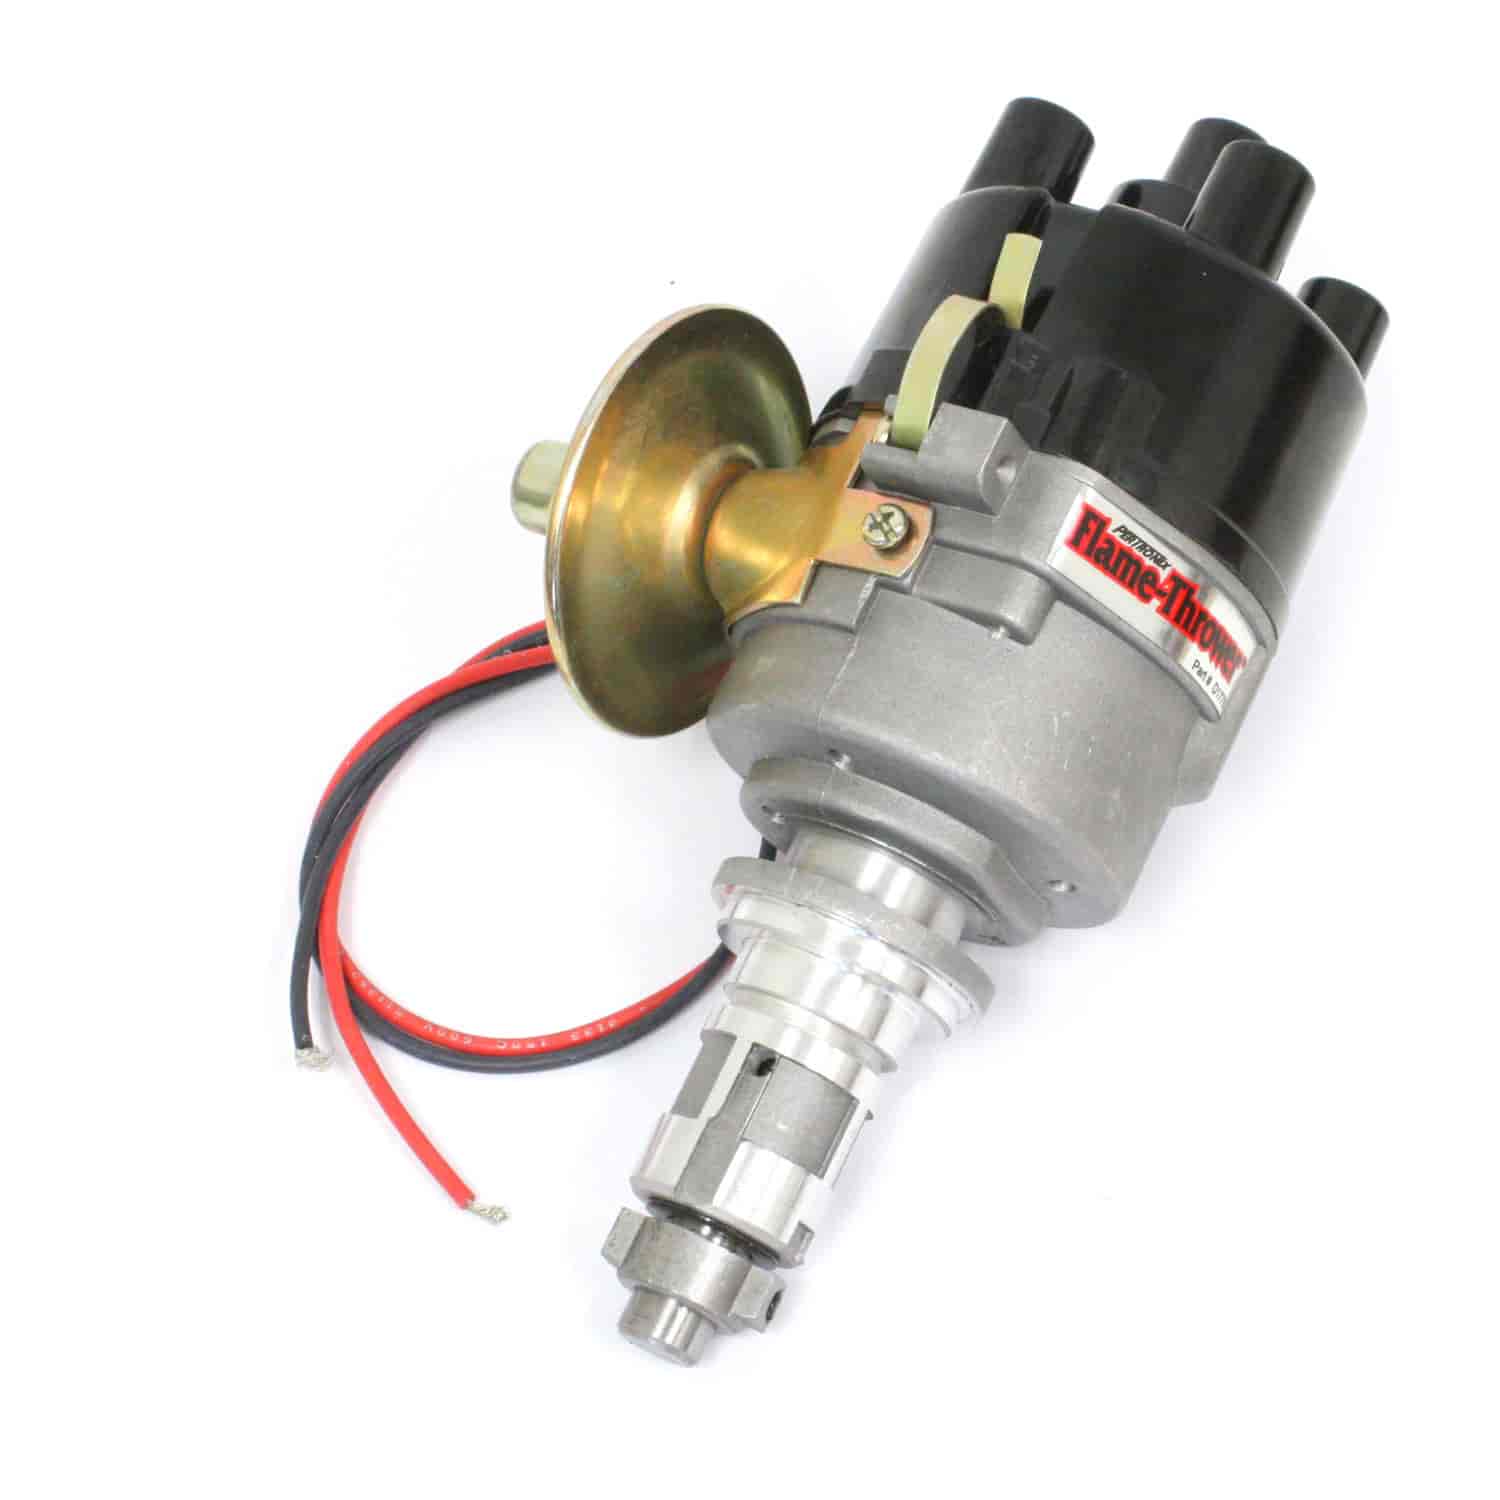 Flame Thrower Cast Distributor British A+, 4 Cyl